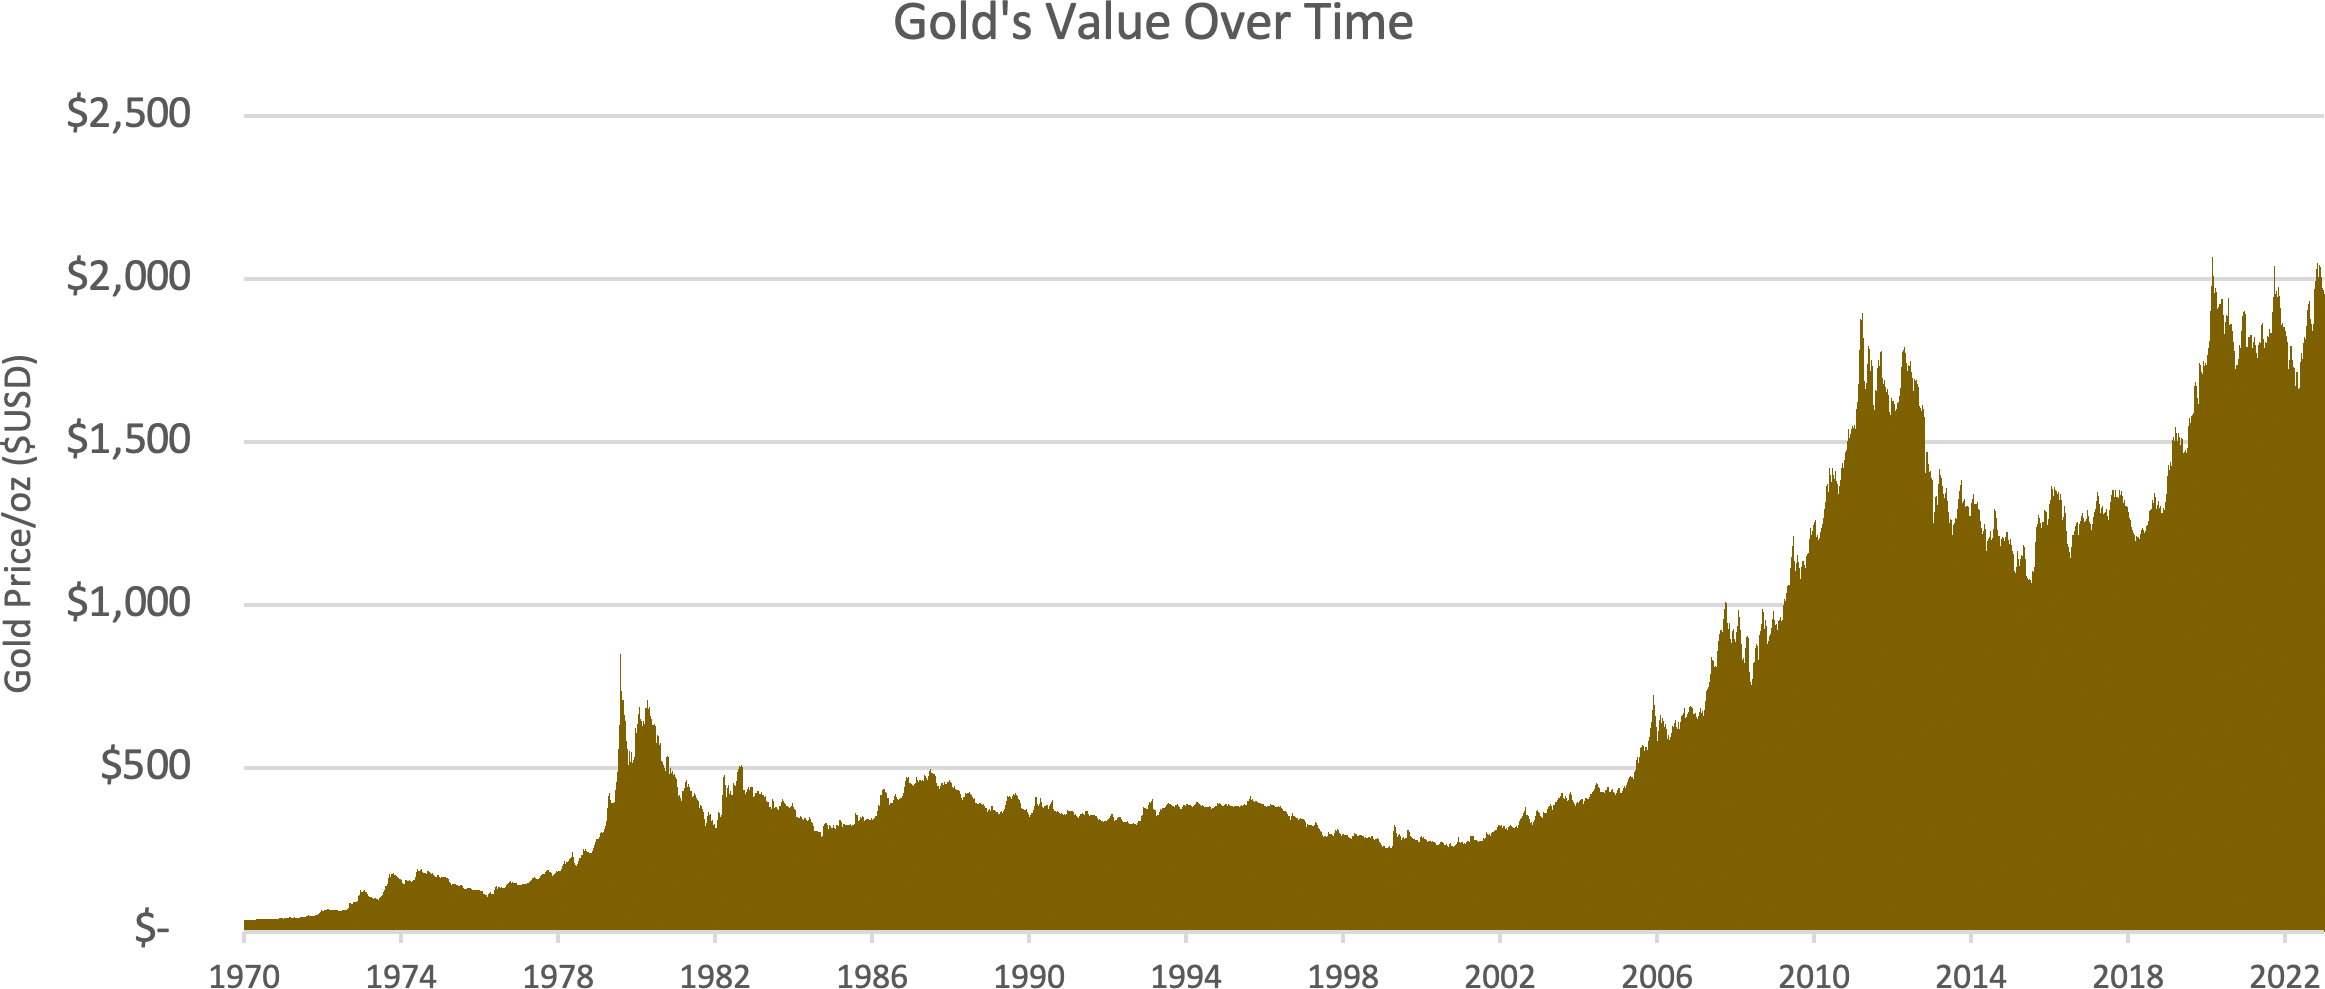 Gold's Value Over Time